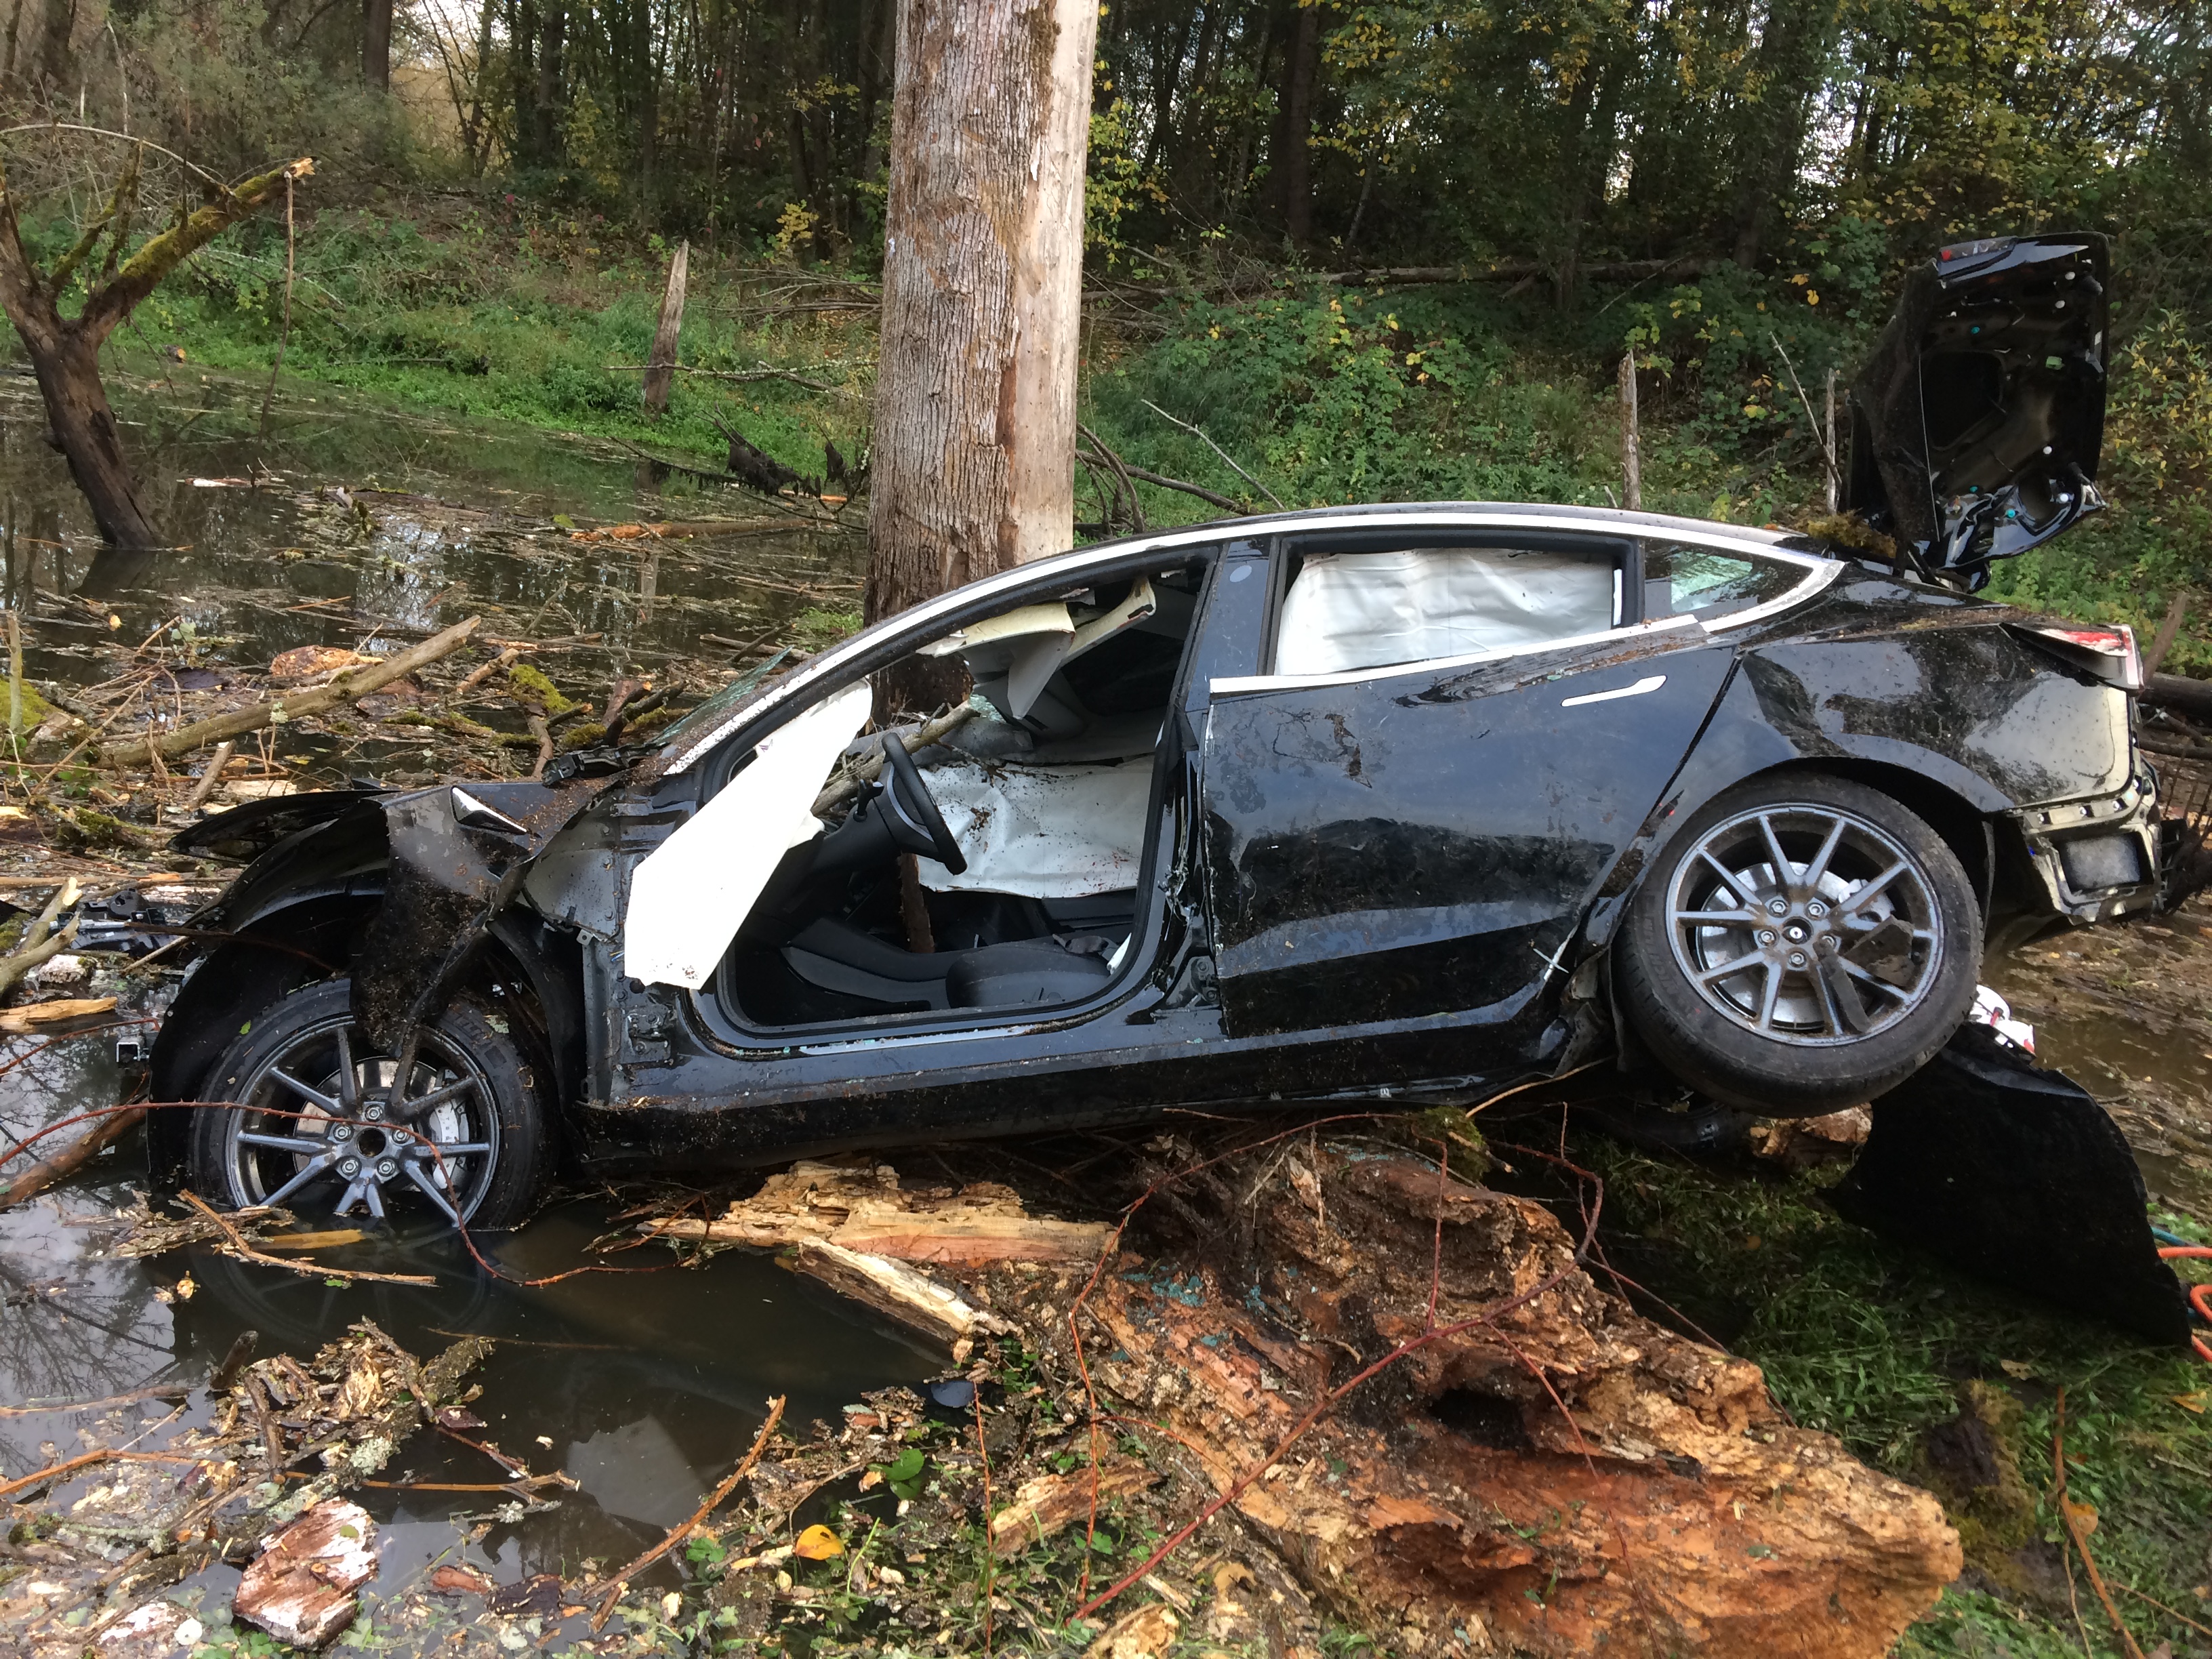 Intoxicated driver loses control of Tesla, goes airborne through trees